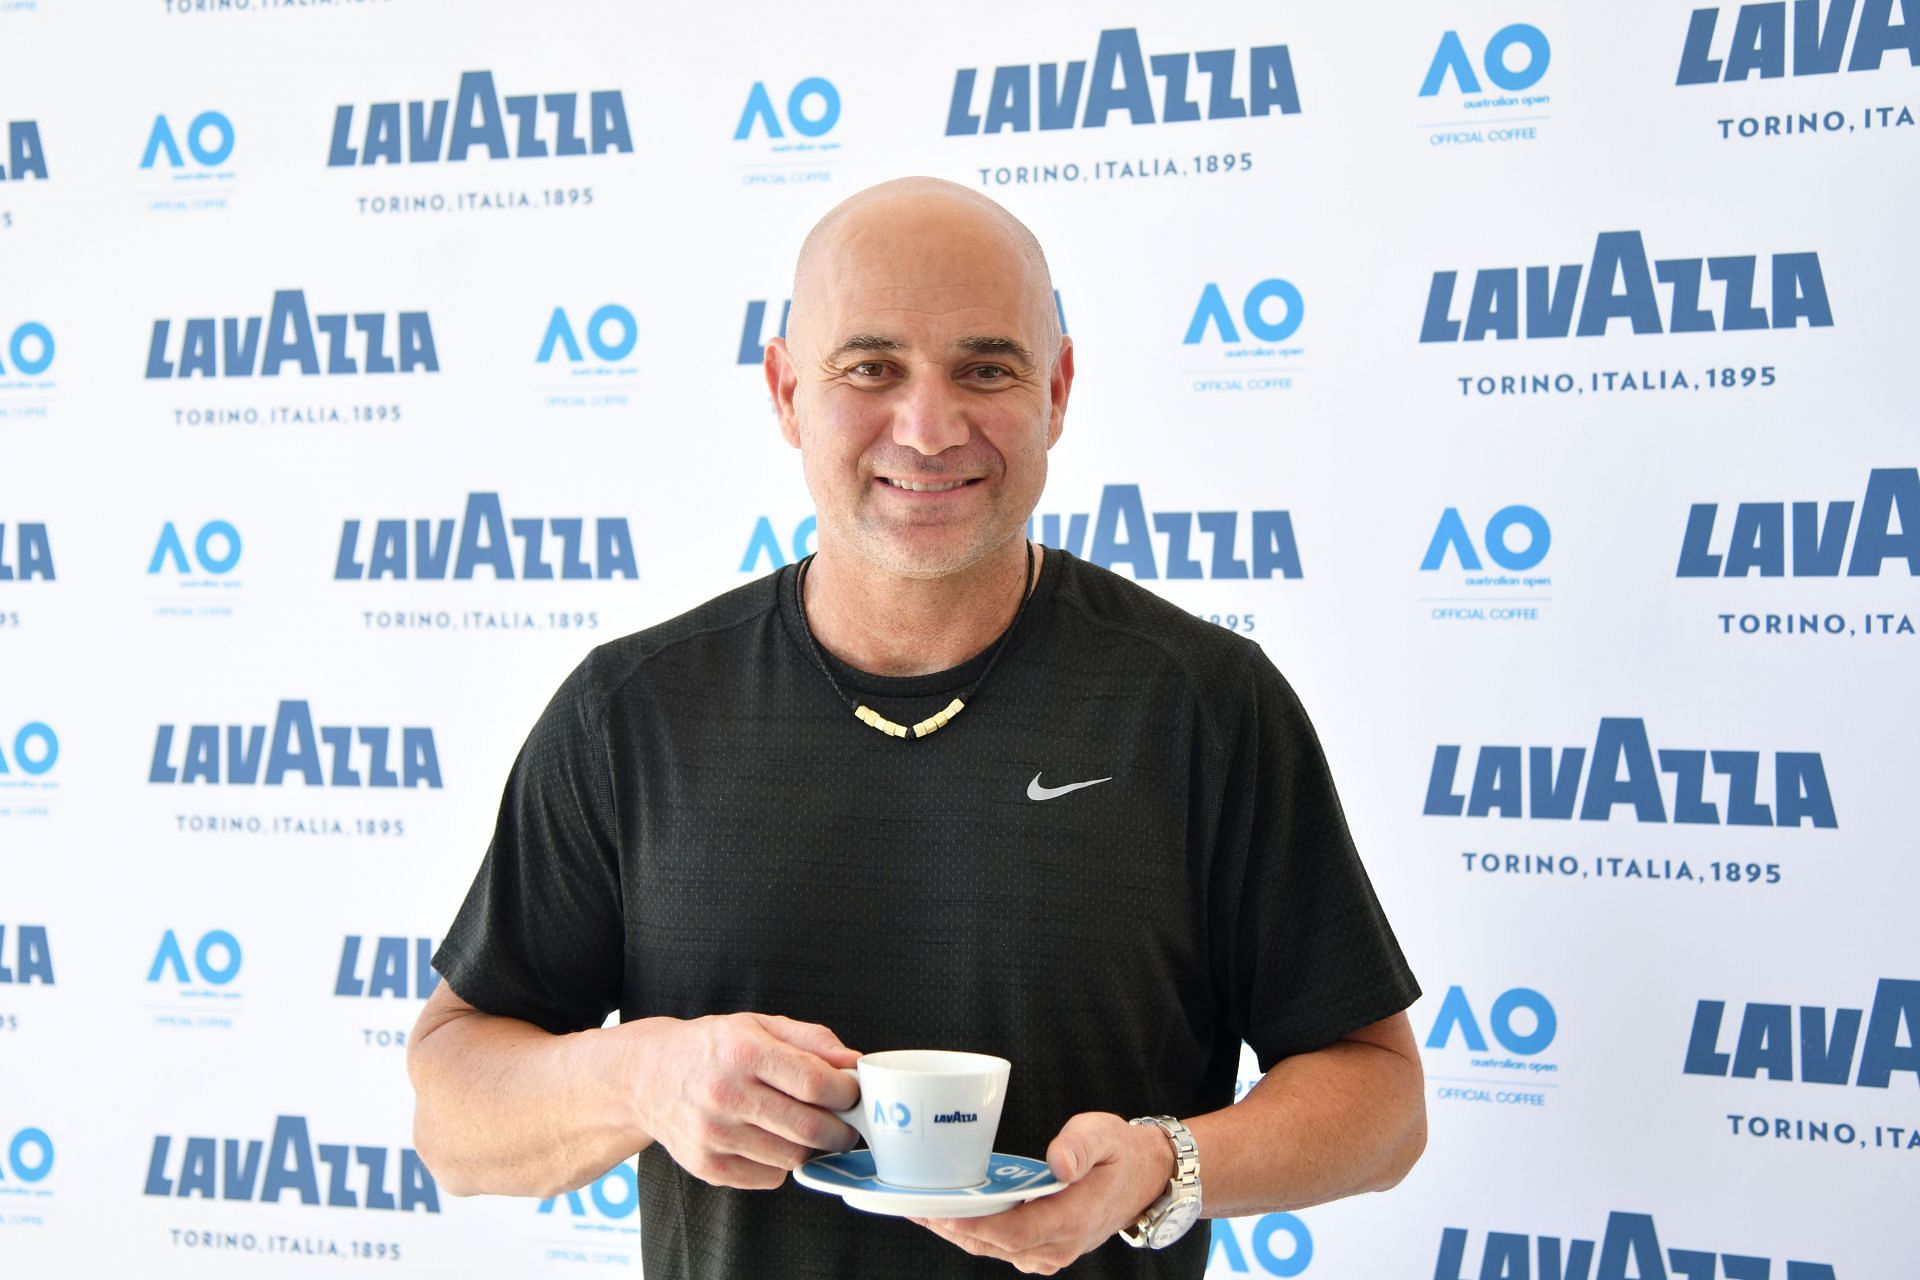 Andre Agassi at the 2018 Australian Open